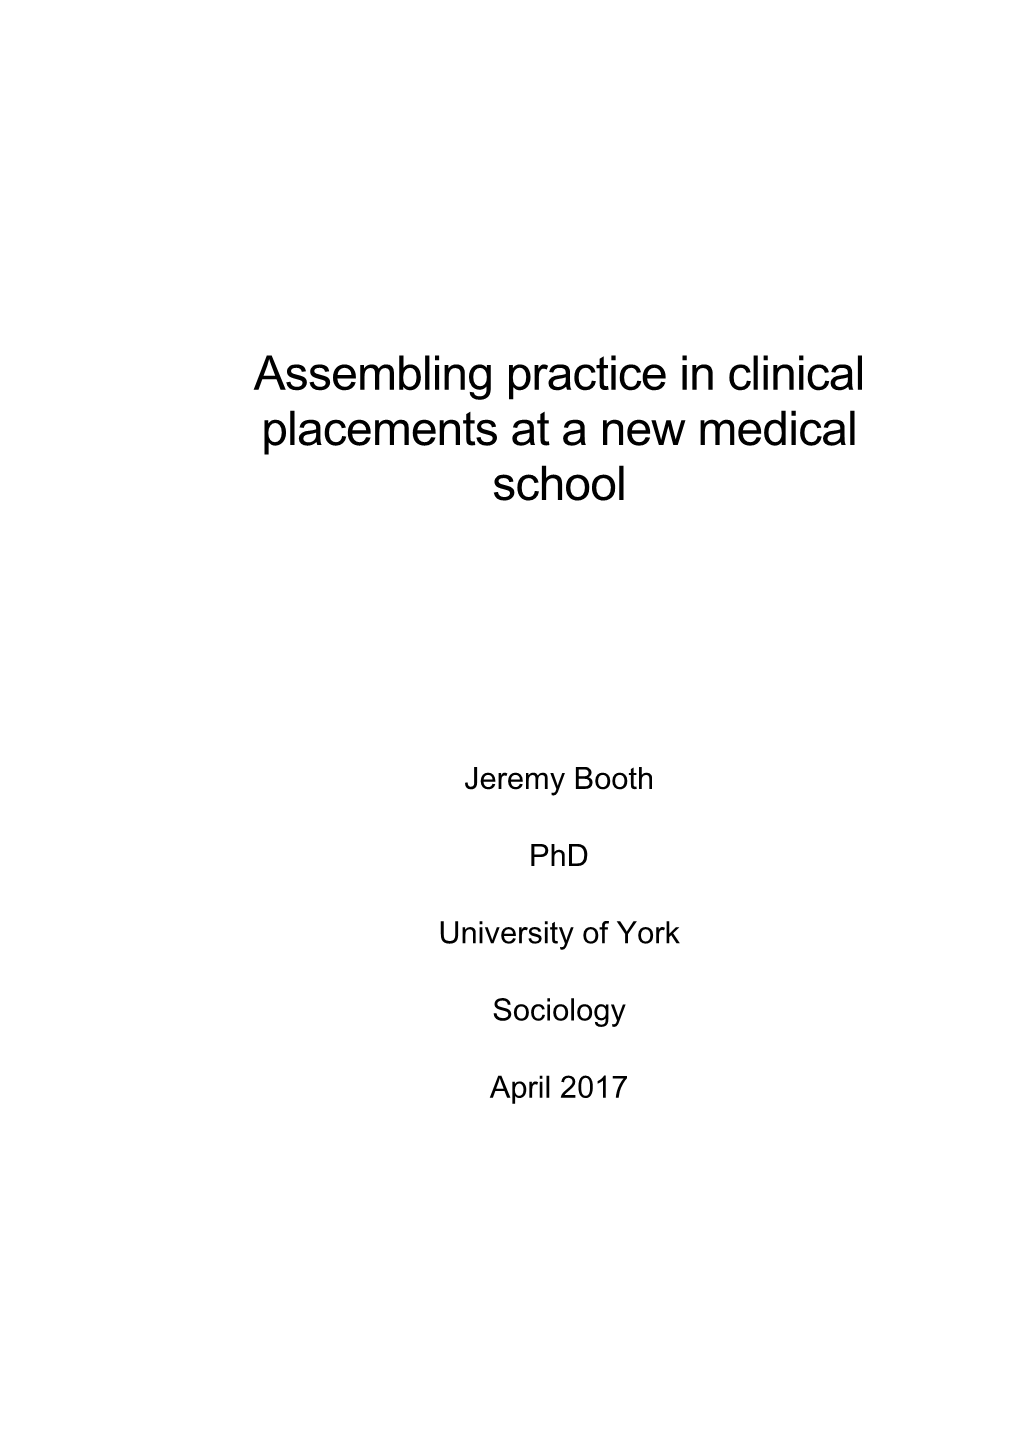 Assembling Practice in Clinical Placements at a New Medical School